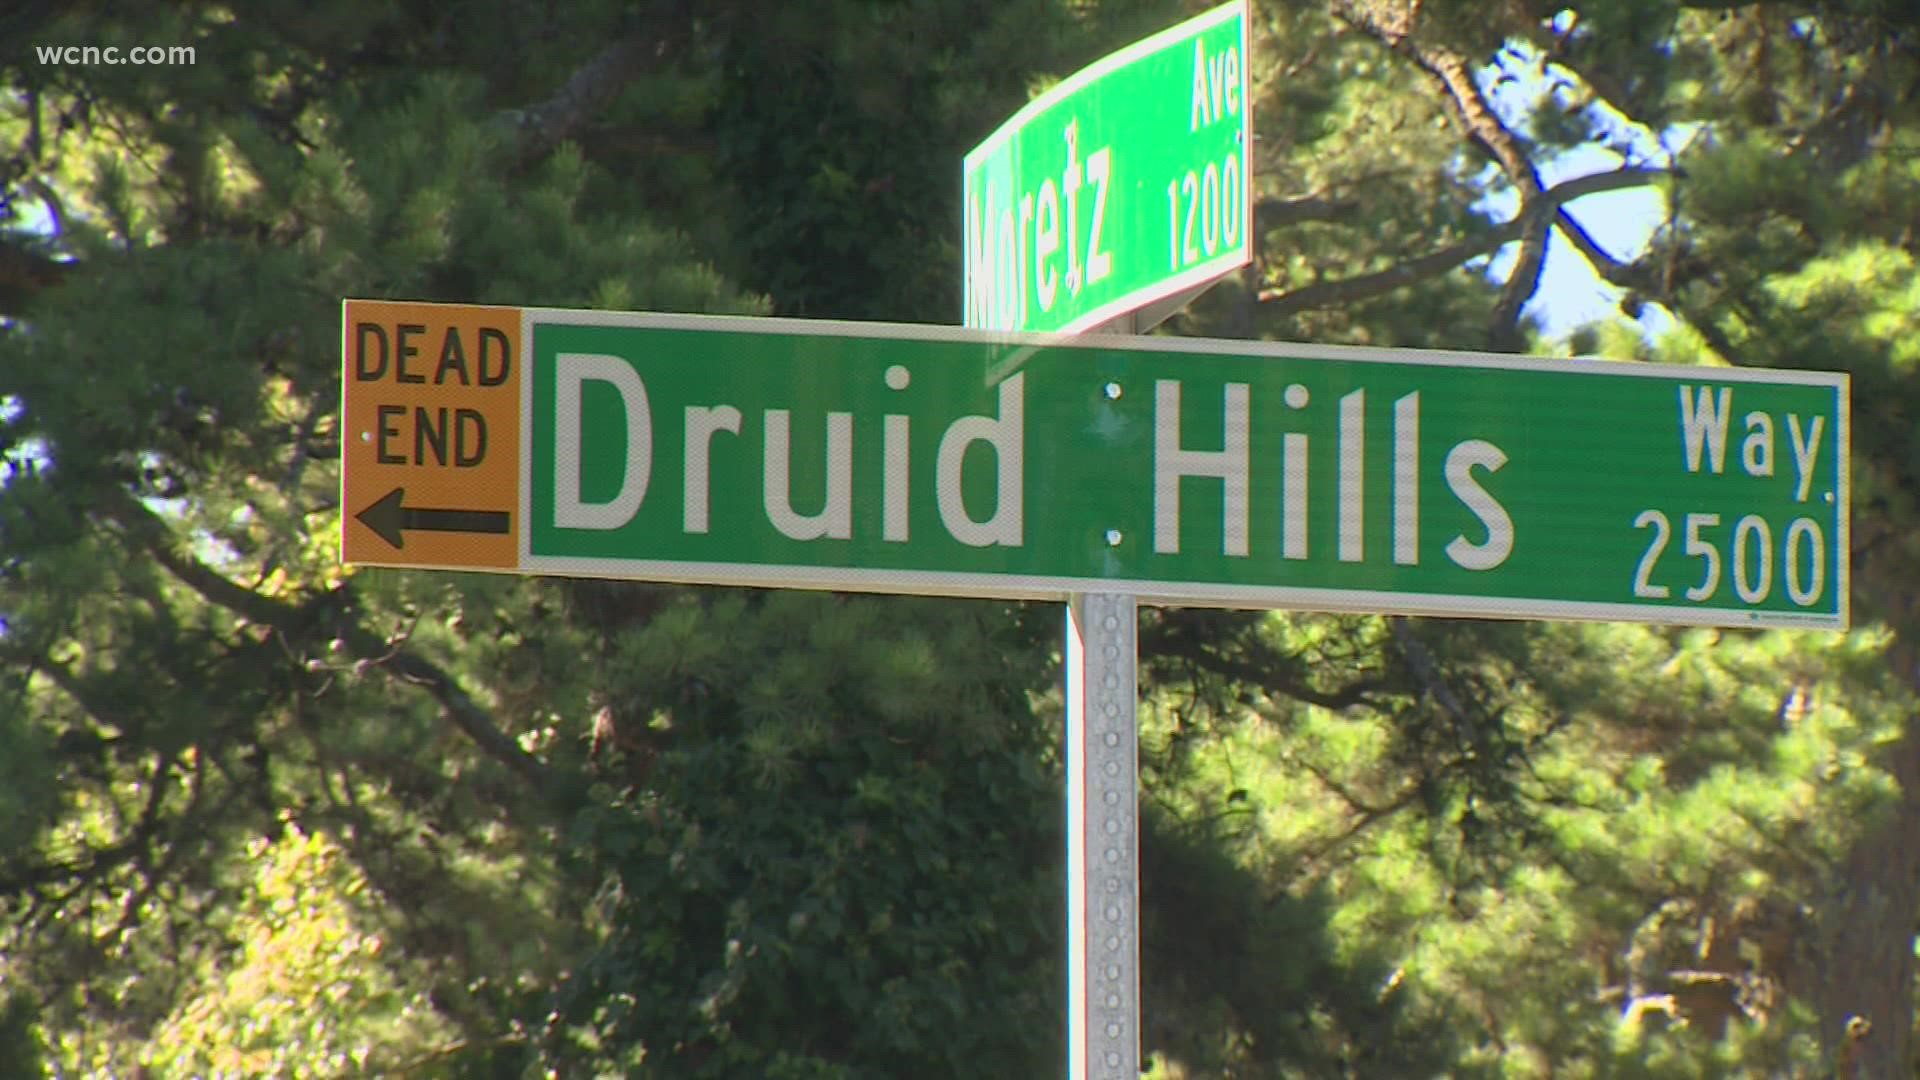 Druid Hills Way was revealed Friday morning after replacing Jefferson Davis Street.